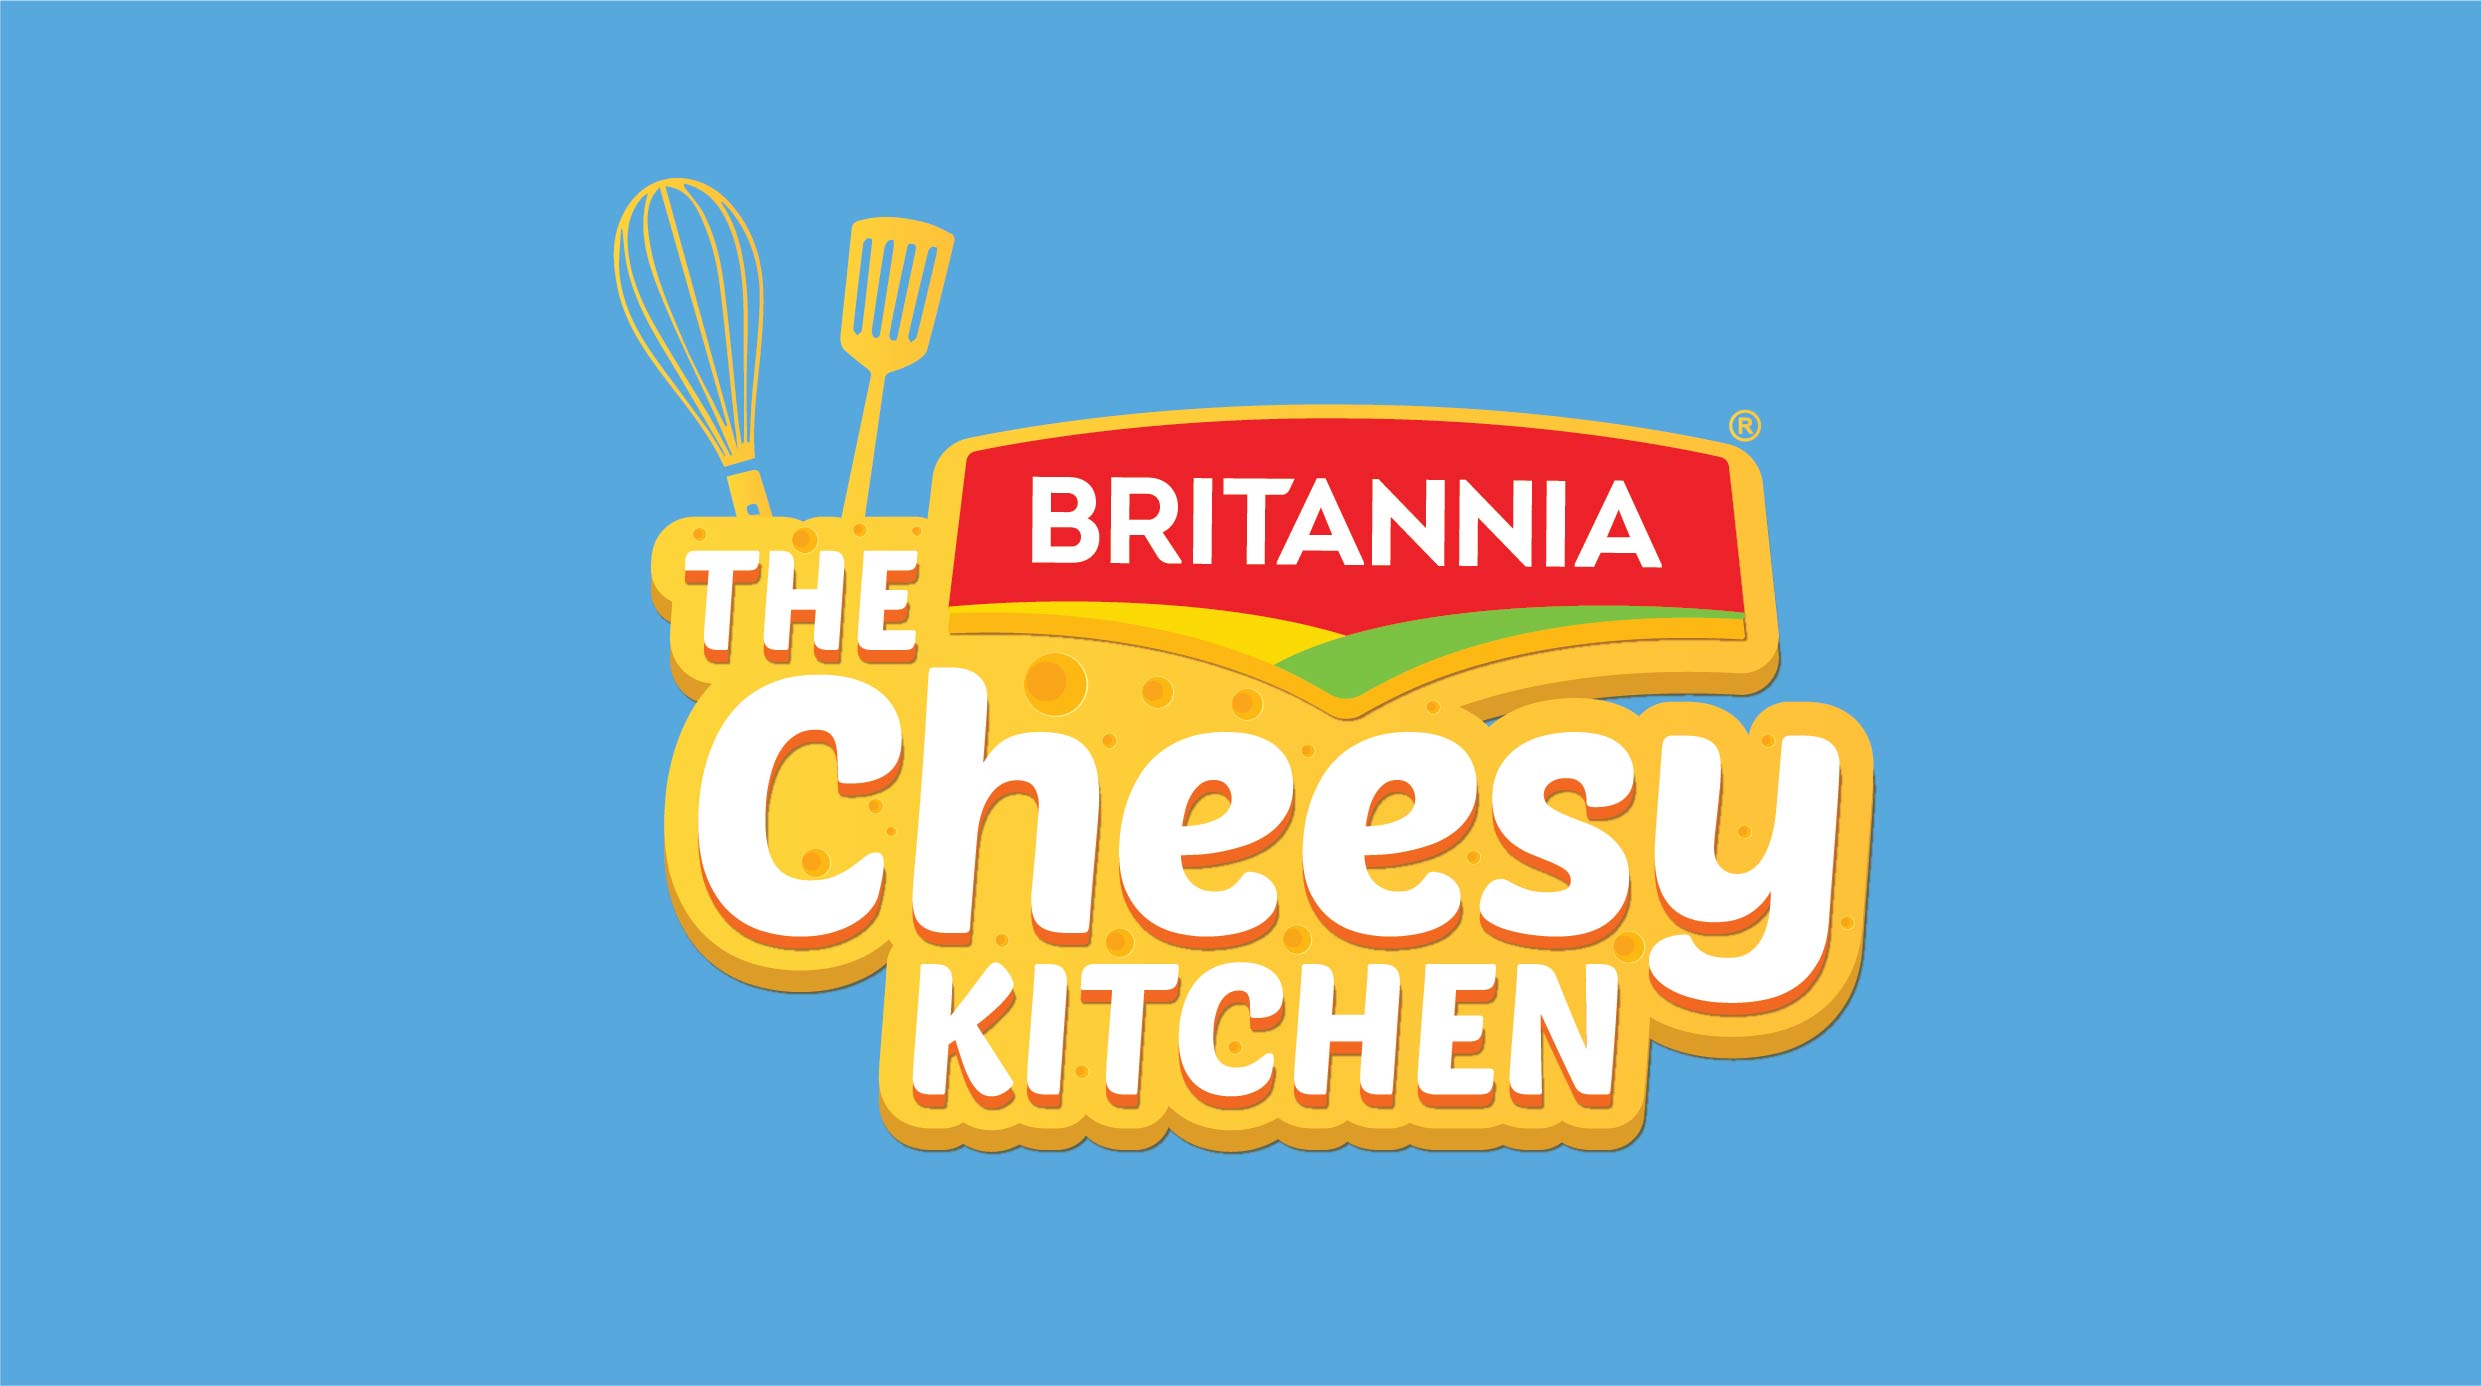 Britannia Cheese proudly offers the widest range of cheese in India- Slices, Cubes, Blocks, Spreads, Pizza Cheese, Low-fat cheese and Cream Cheese.